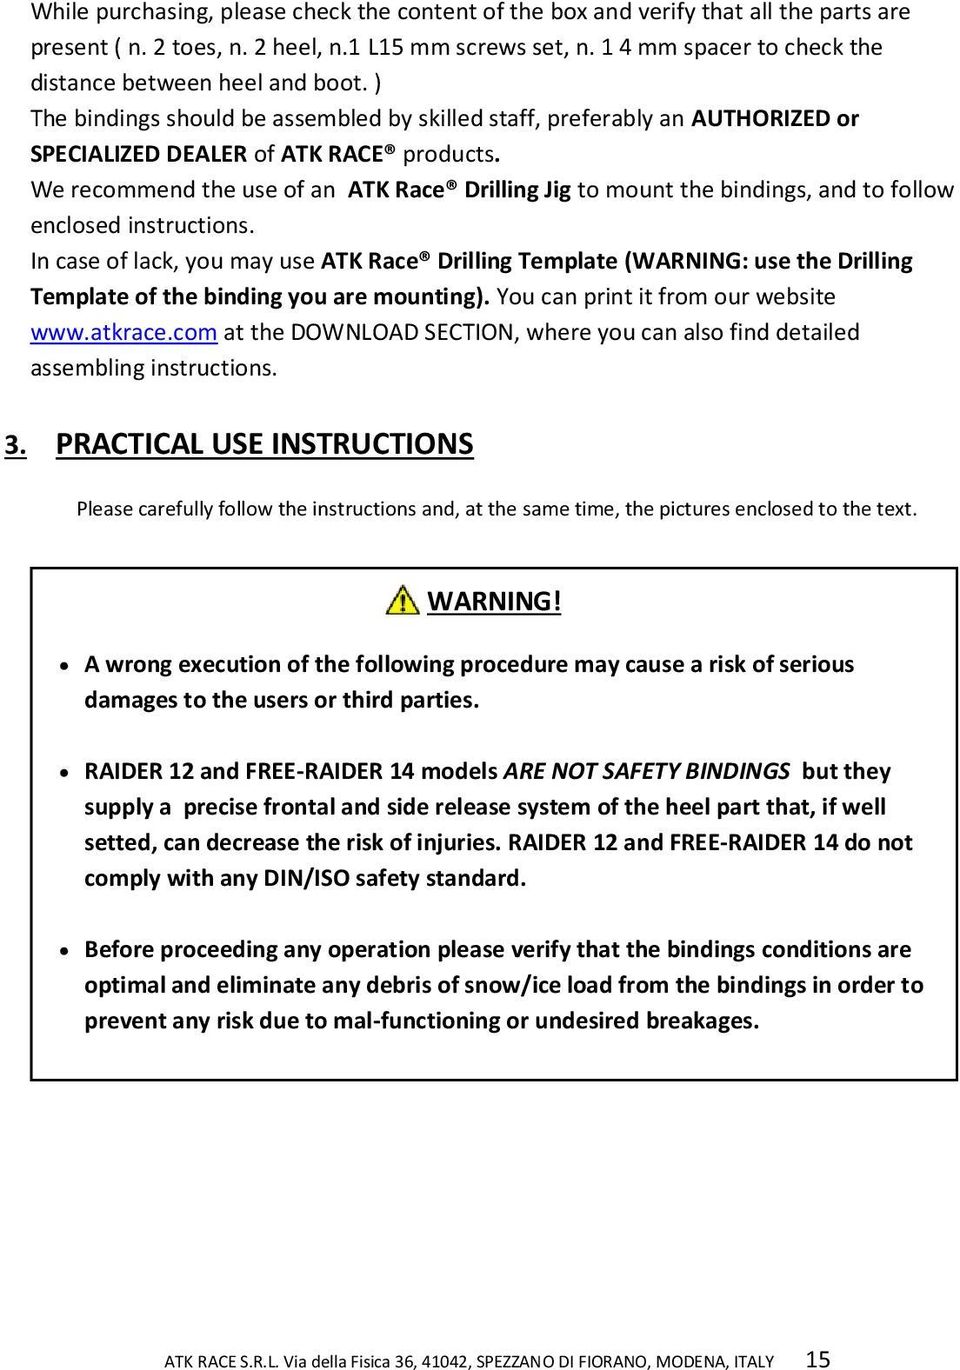 We recommend the use of an ATK Race Drilling Jig to mount the bindings, and to follow enclosed instructions.